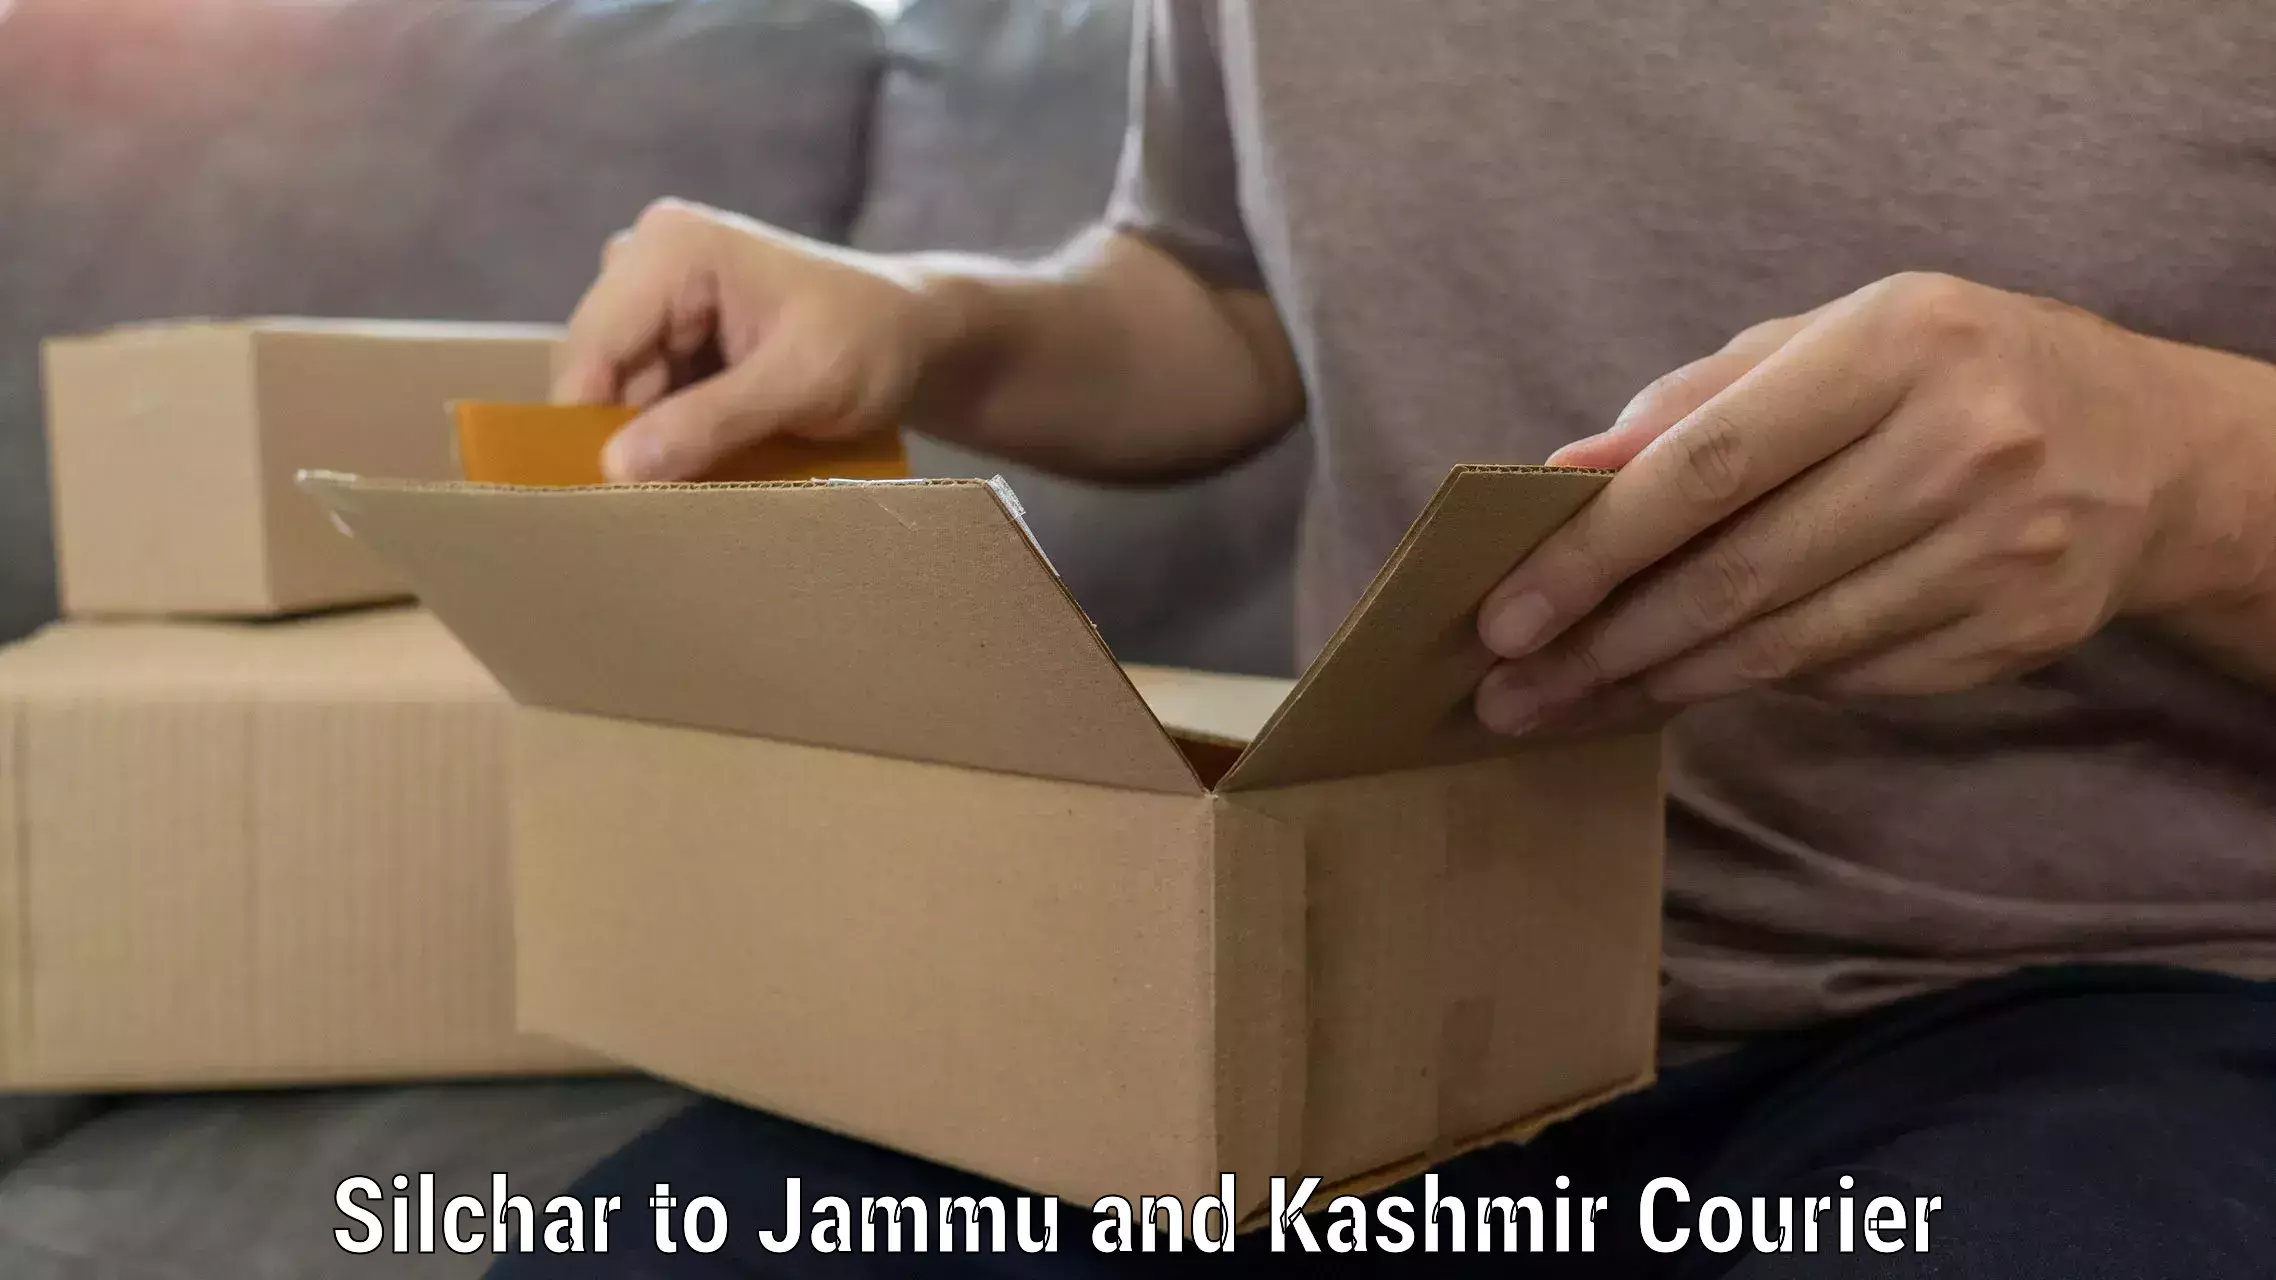 Reliable relocation services Silchar to Jammu and Kashmir